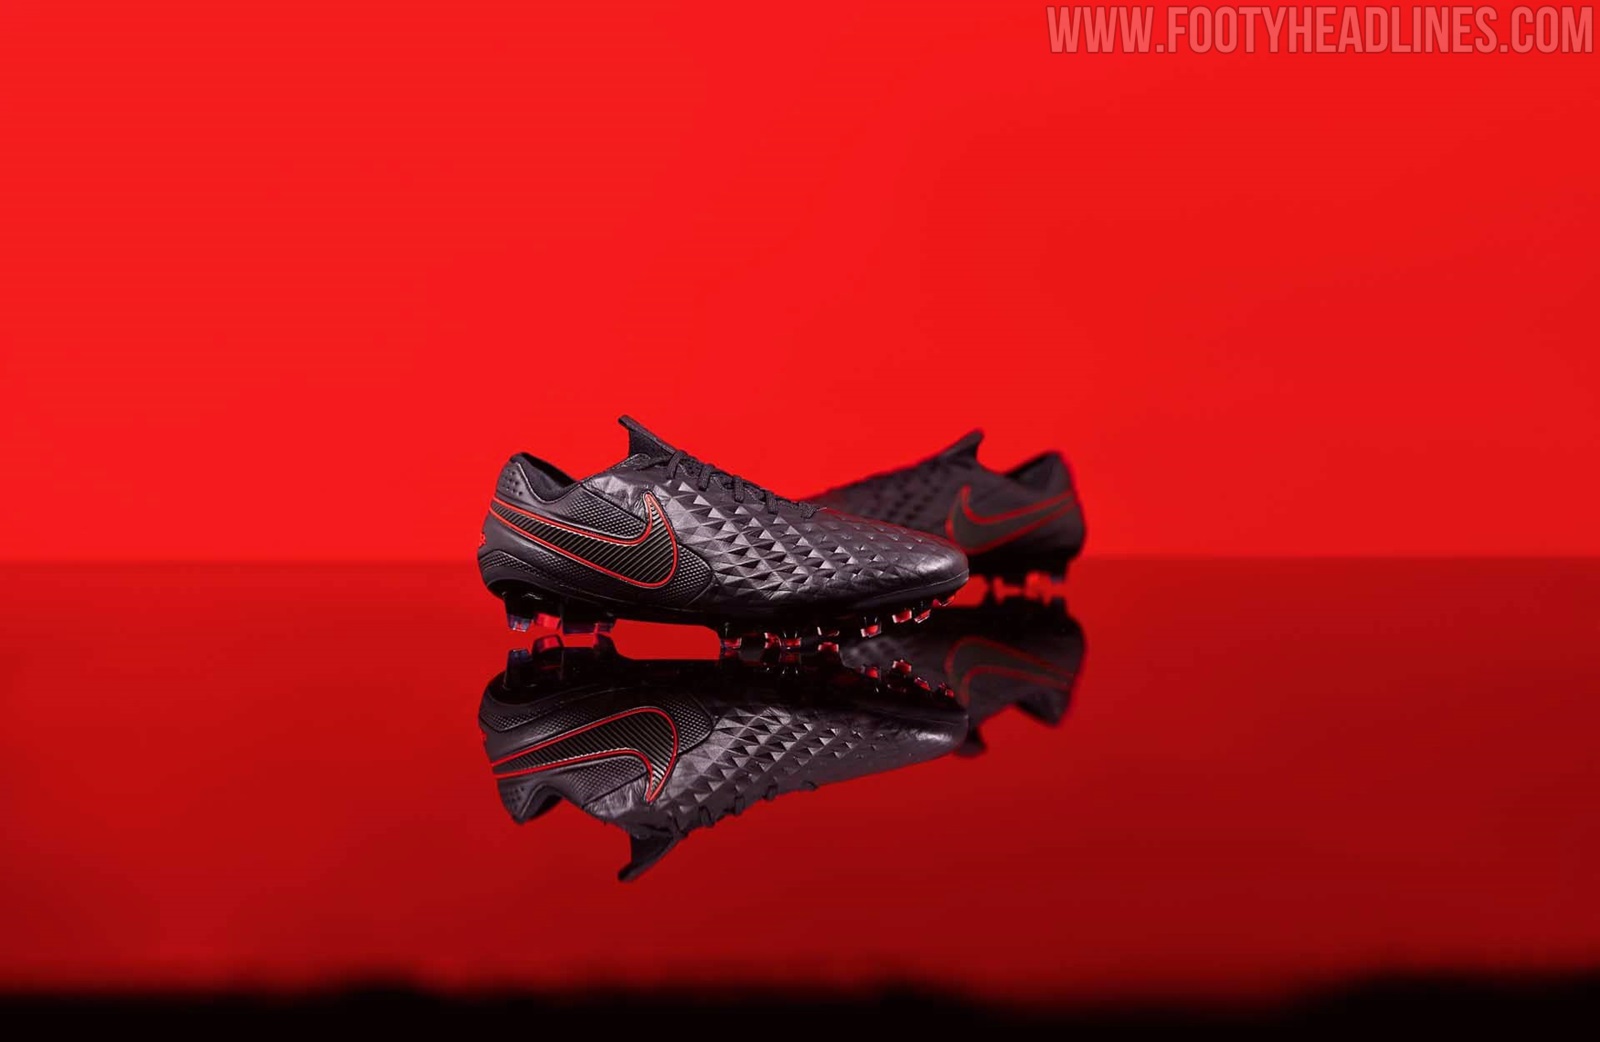 Black / Red Nike Tiempo Legend VIII 2020-21 'Black Pack' Boots Released ...